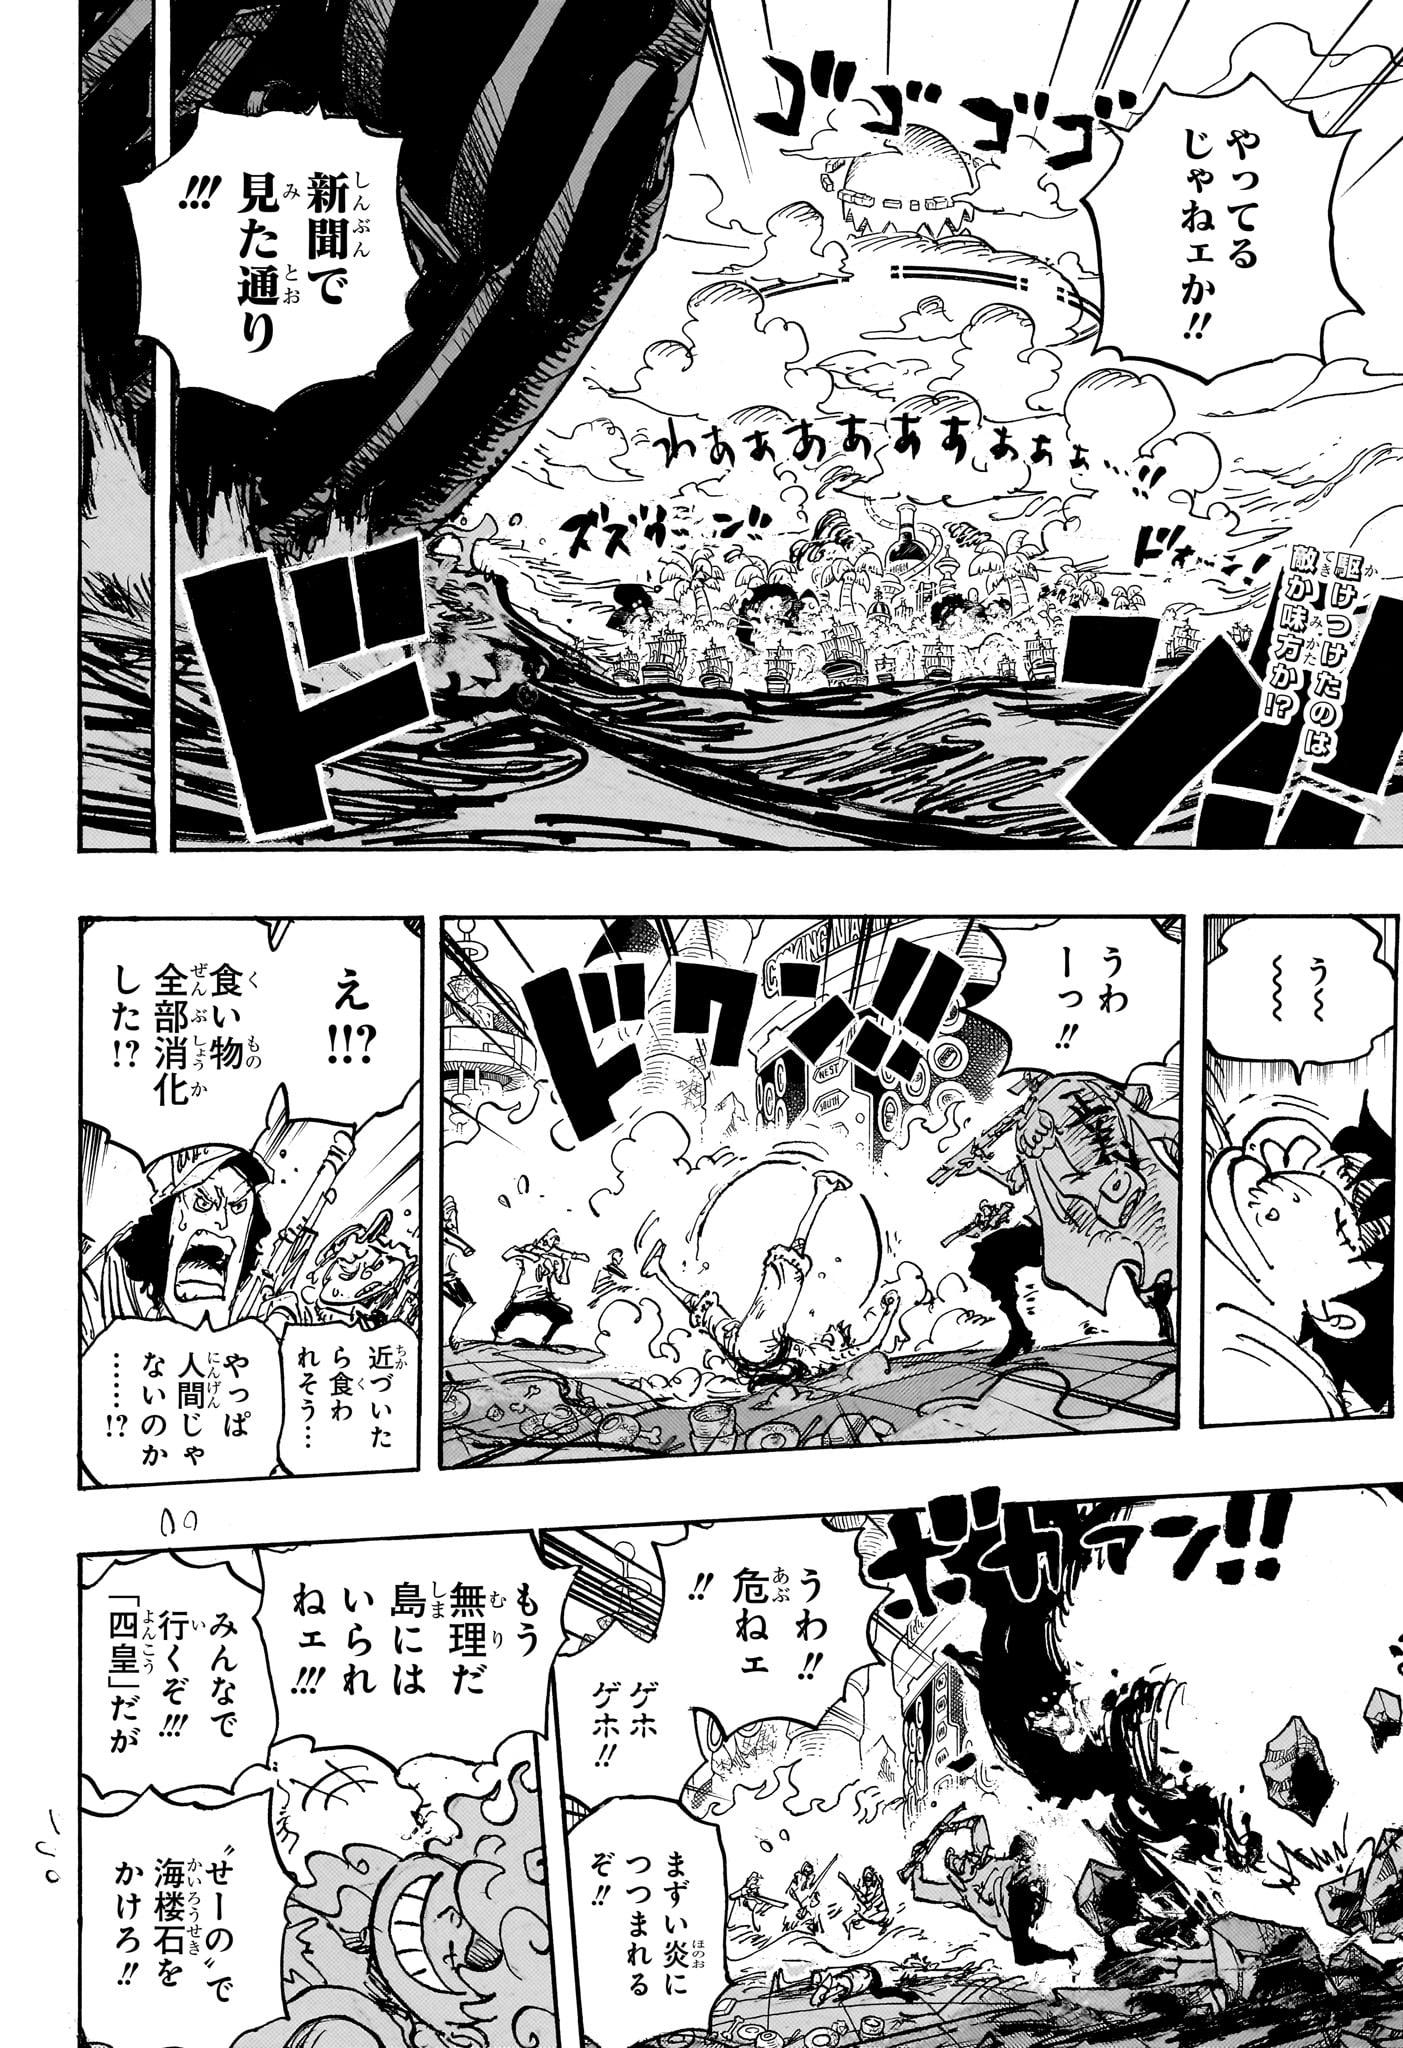 One Piece - Chapter 1106 - Page 2